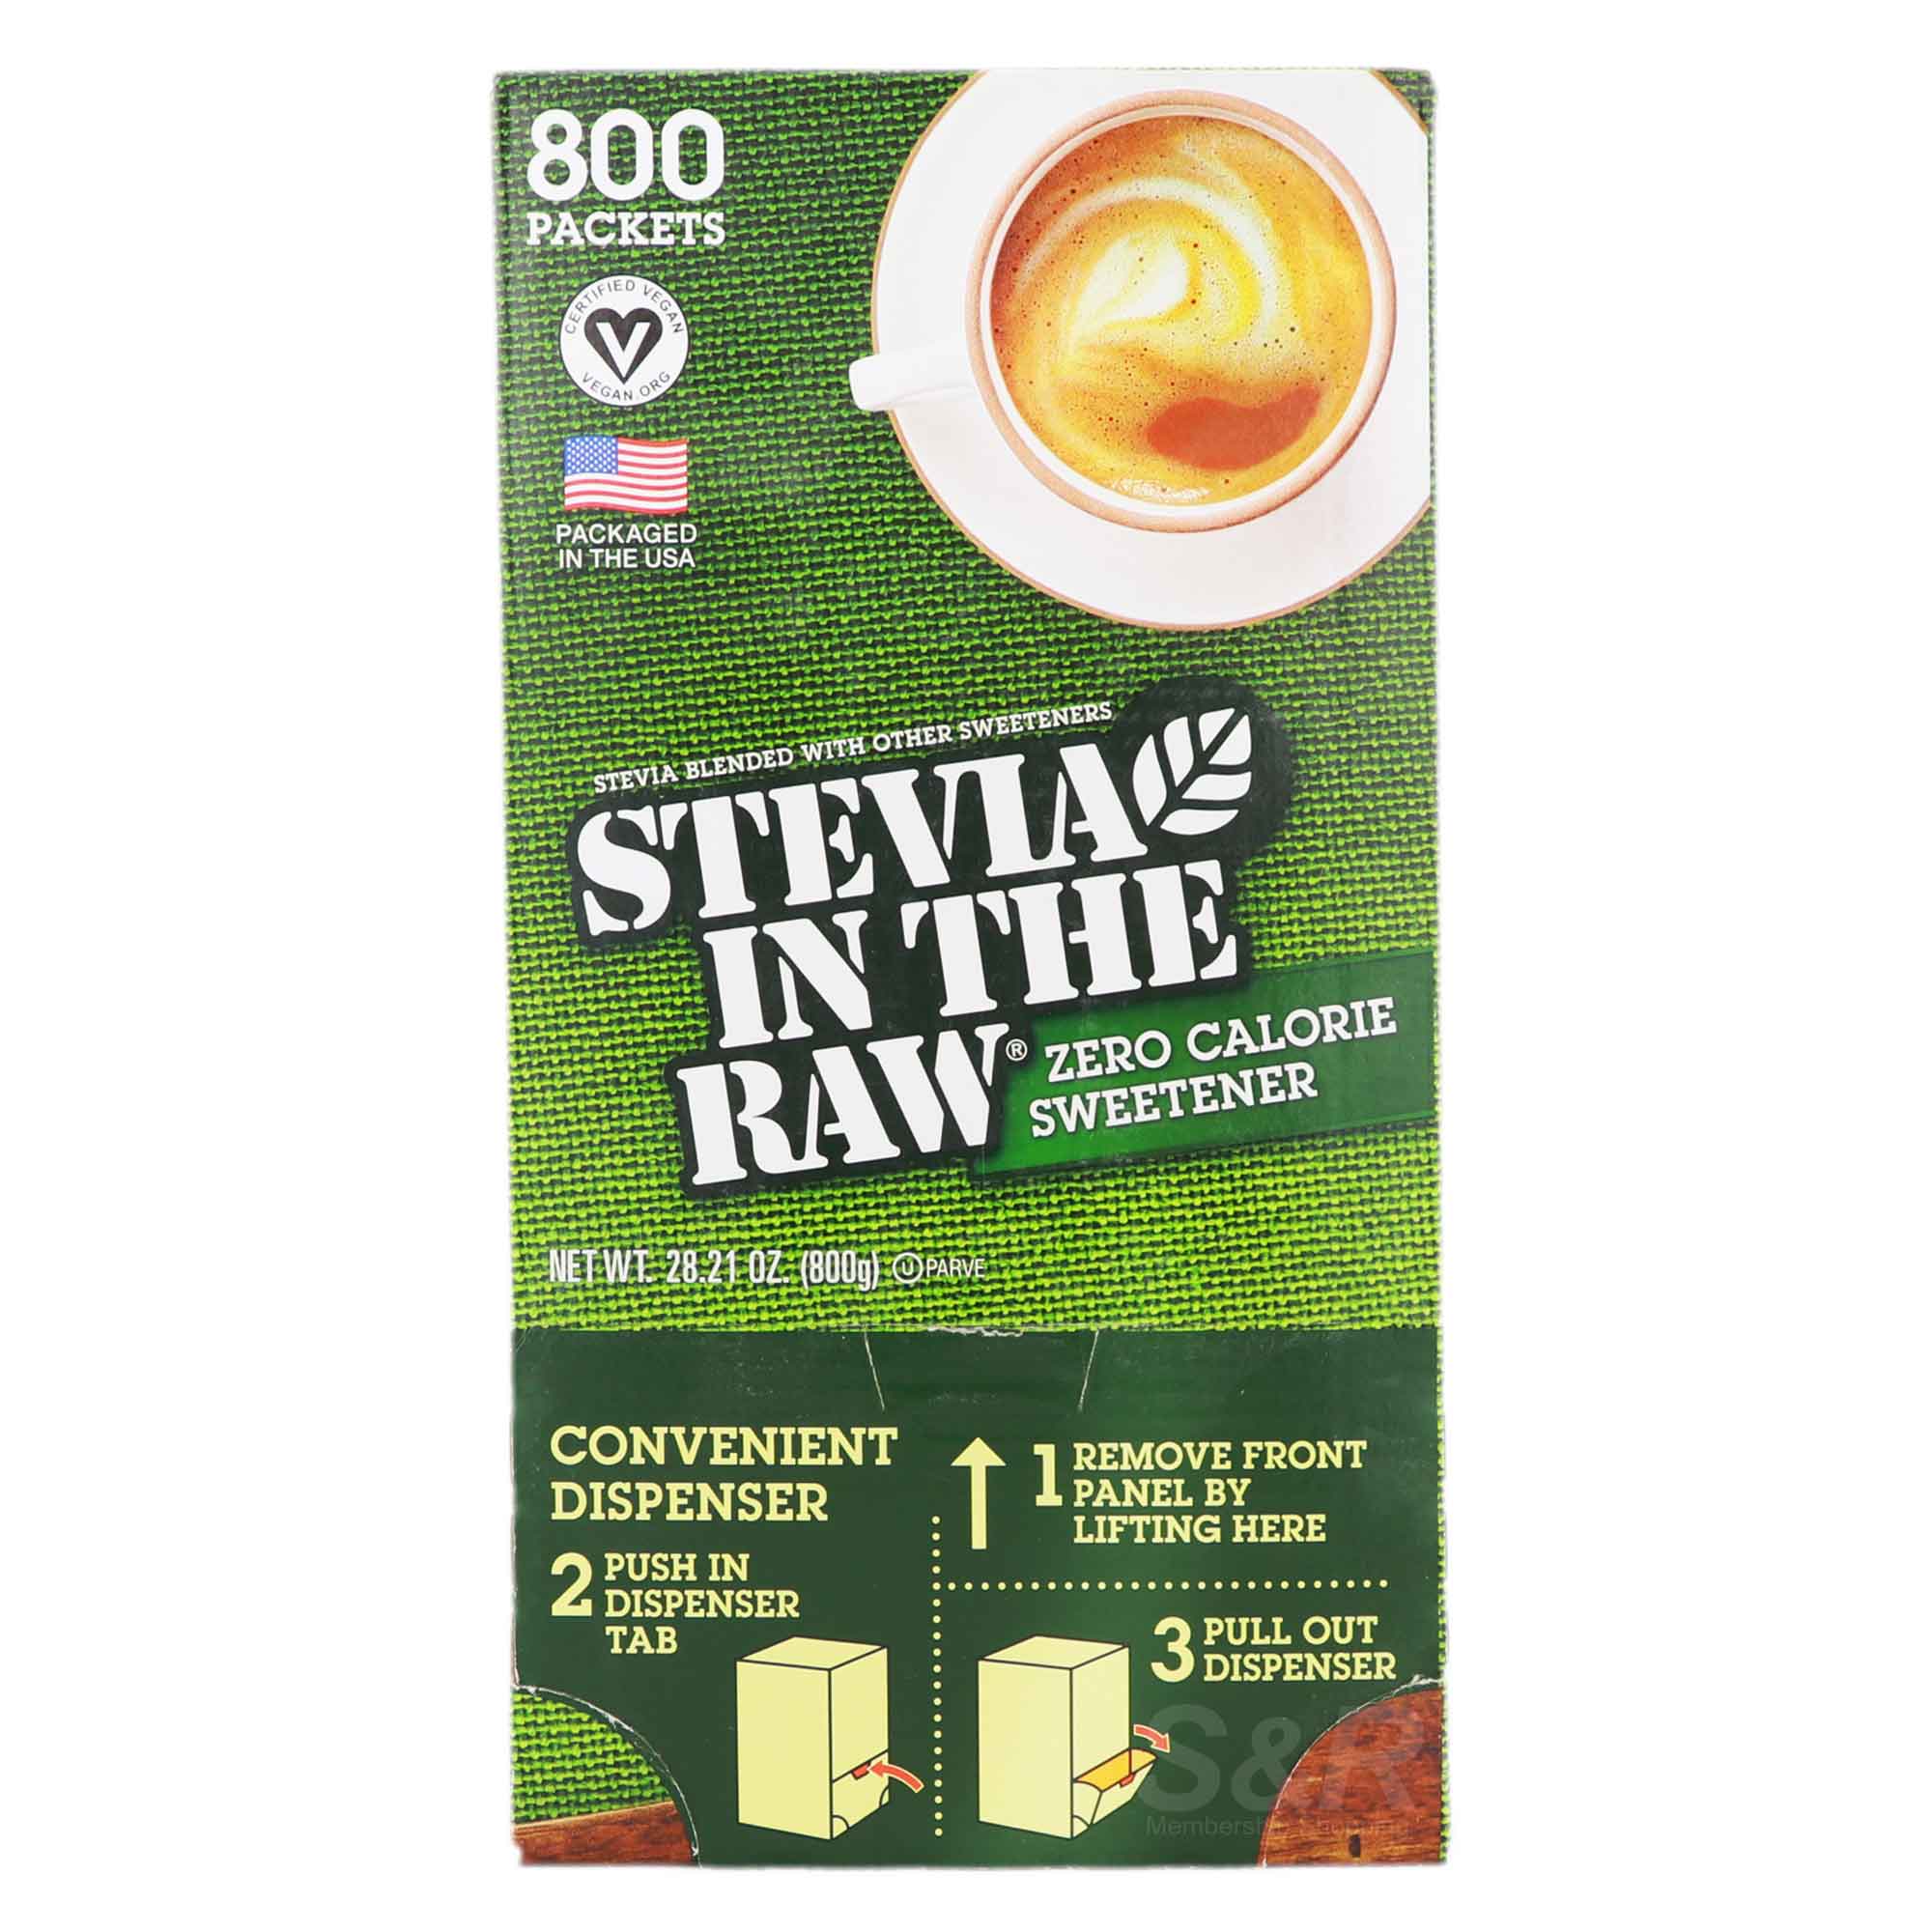 Stevia In The Raw Zero Calorie Sweetener 800 packets